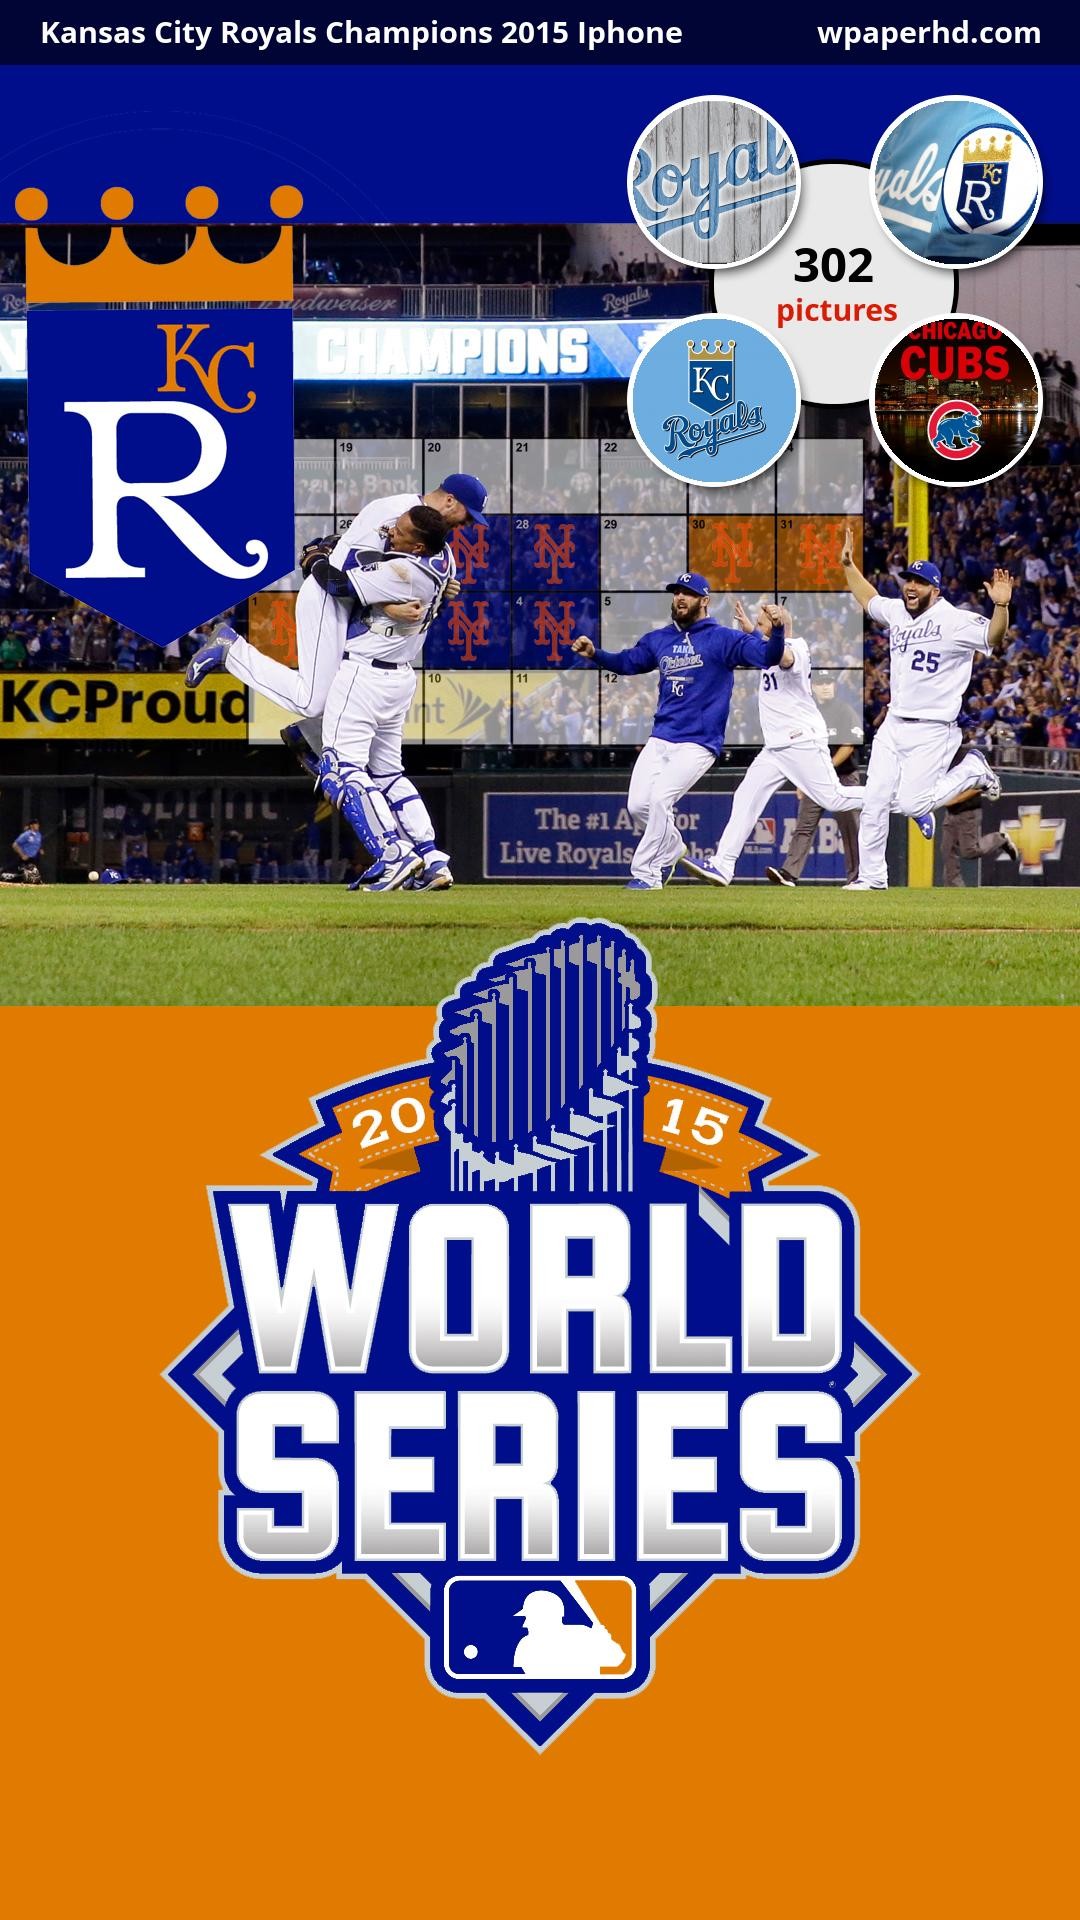 1080x1920 ... Royals Champions 2015 Iphone wallpaper, where you can download this  picture in Original size and ...